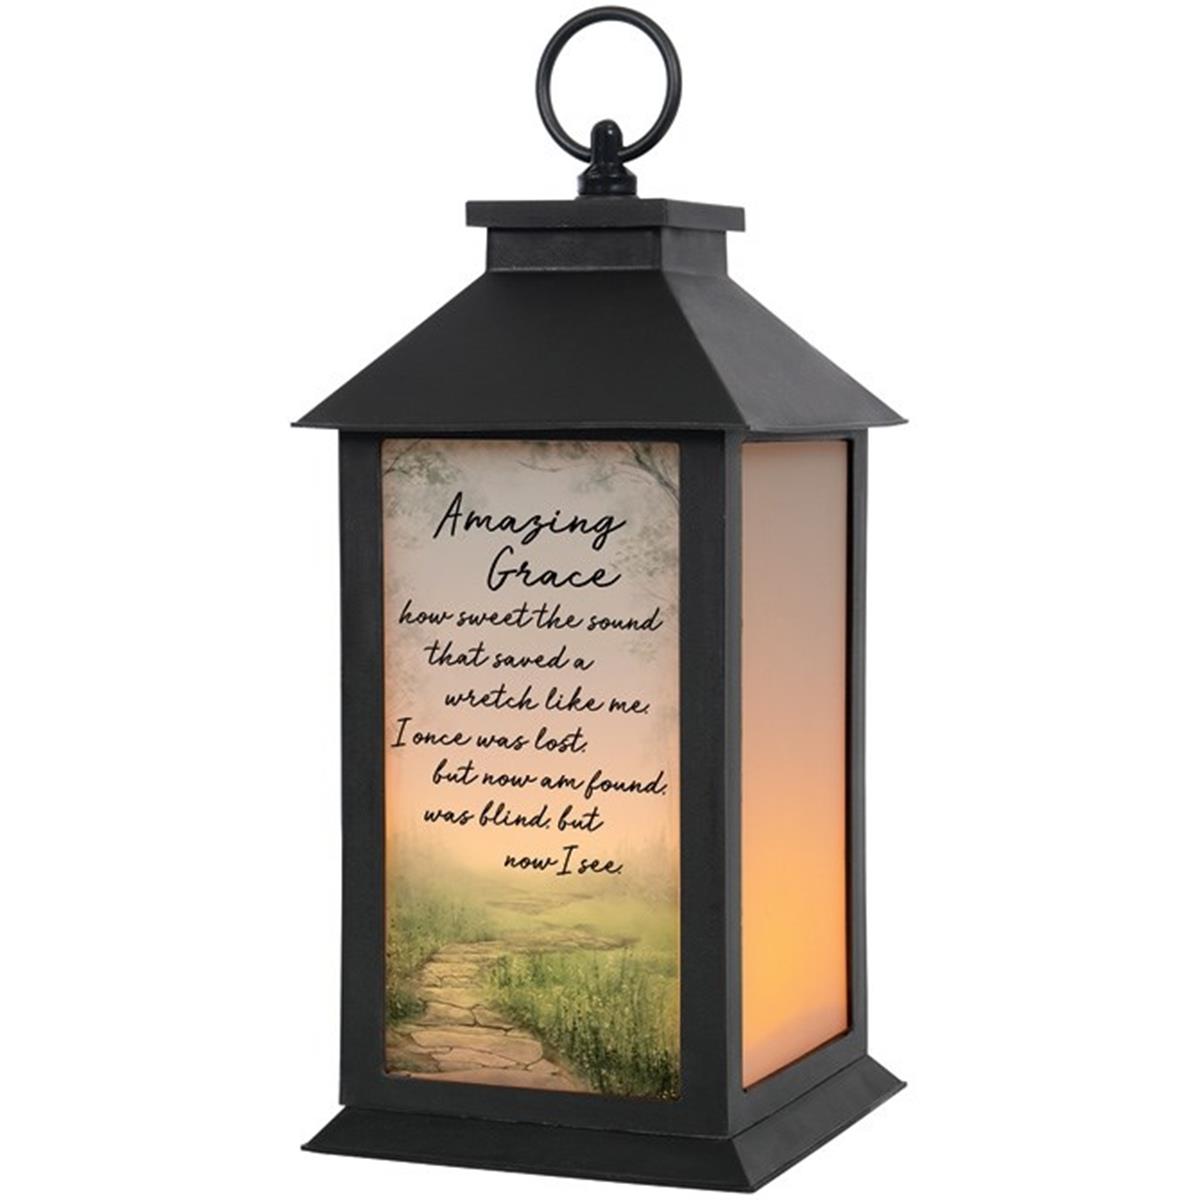 Picture of Carson Home Accents 250831 13 x 5.5 x 5.5 in. Amazing Grace Lantern with LED Candle & Timer